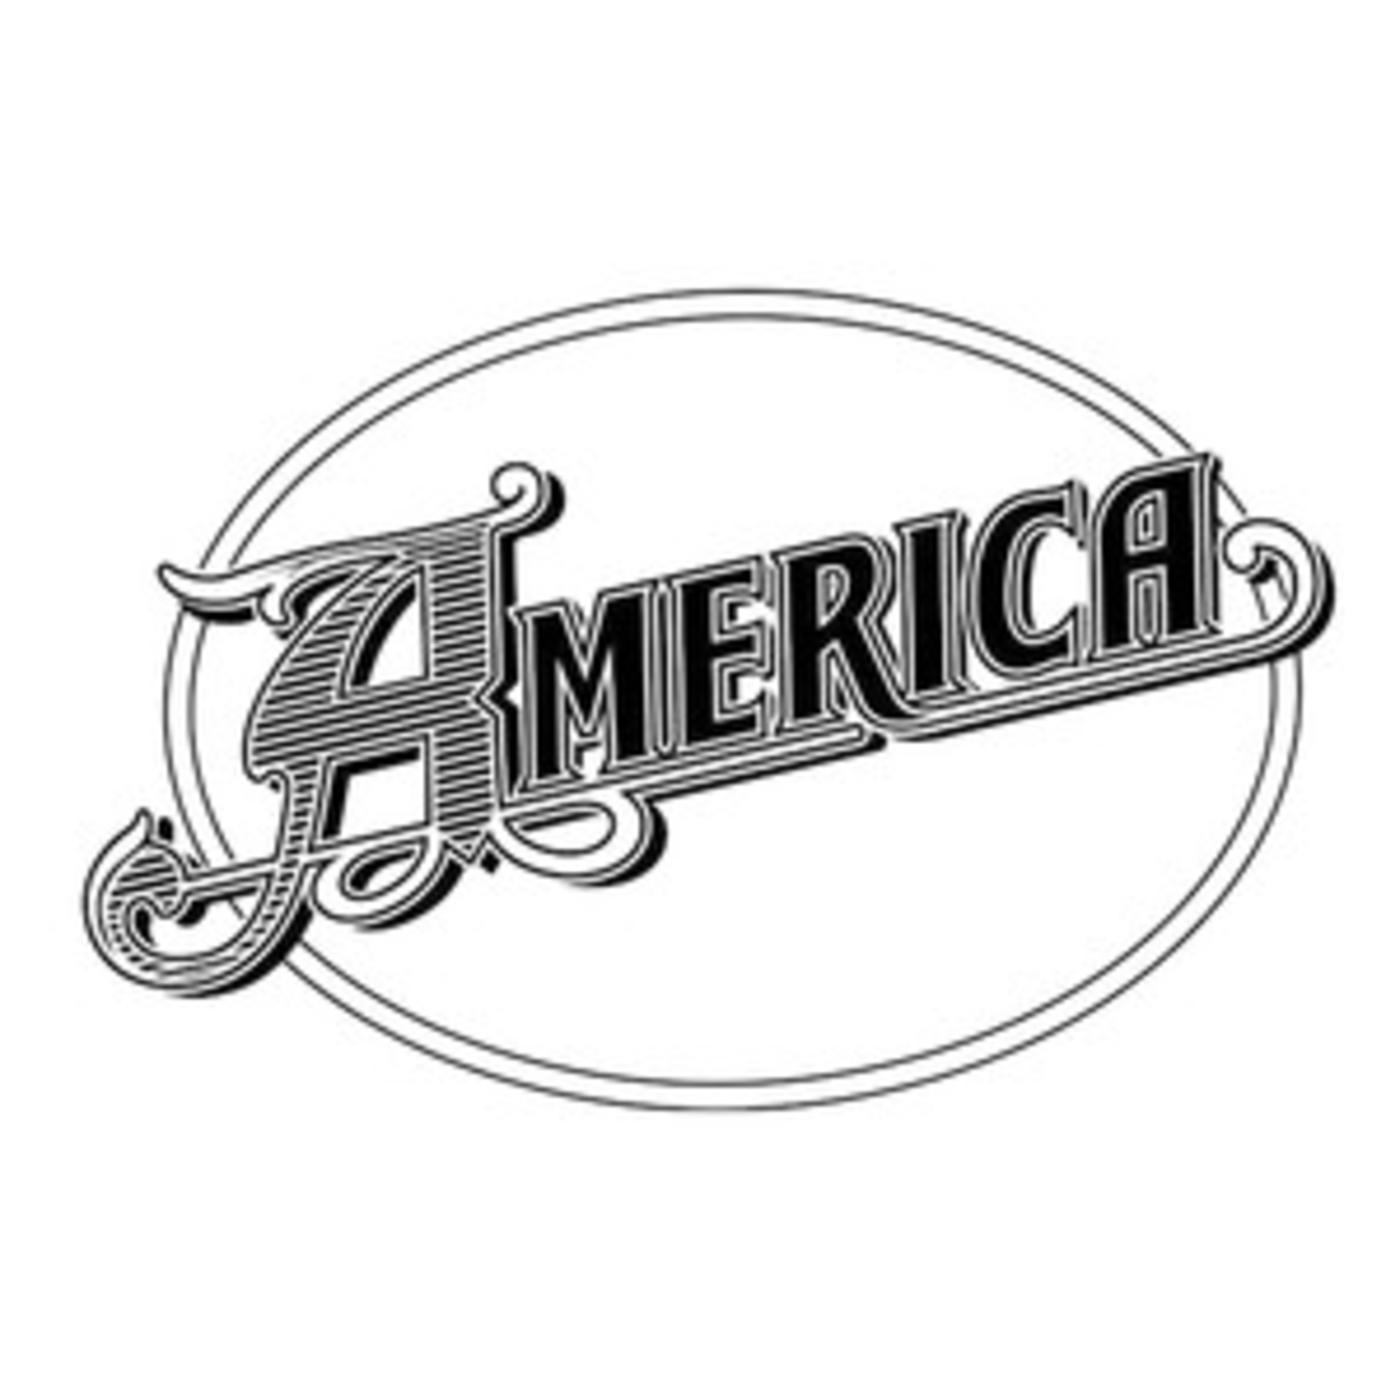 Official America playlist - A Horse With No Name, Ventura Highway, Sister Golden Hair, Lonely People